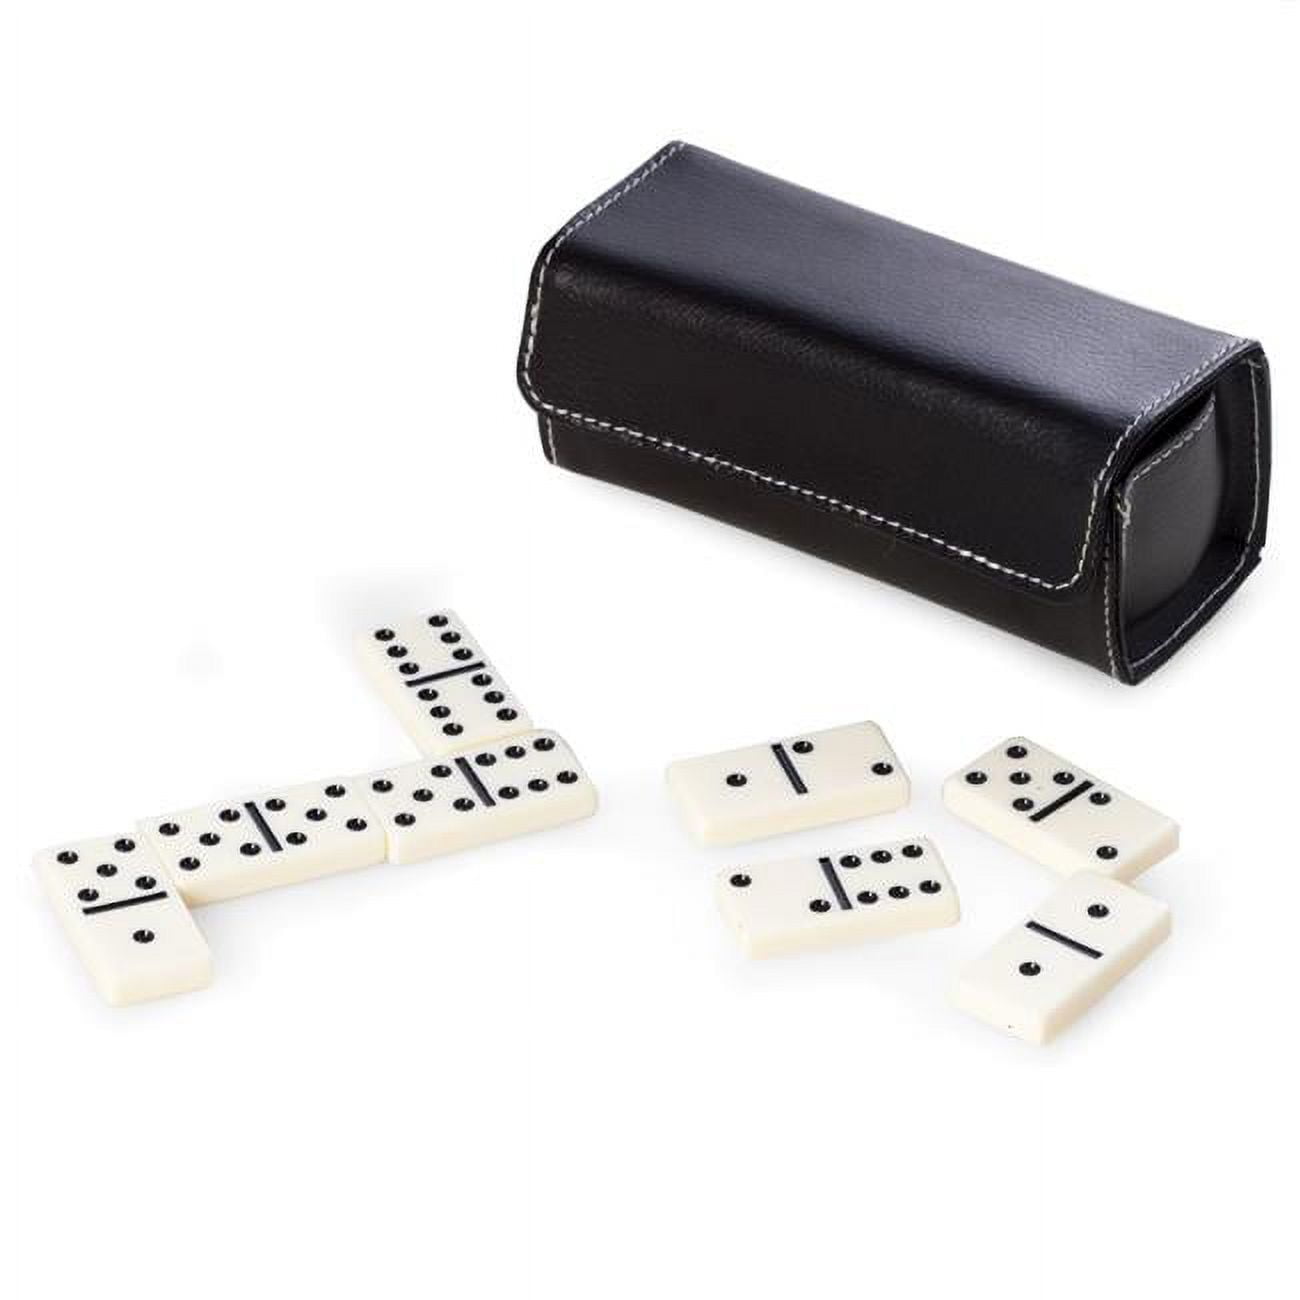 Picture of Bey-Berk International G525 Domino Set in Black Leather Case with Magnetic Closure